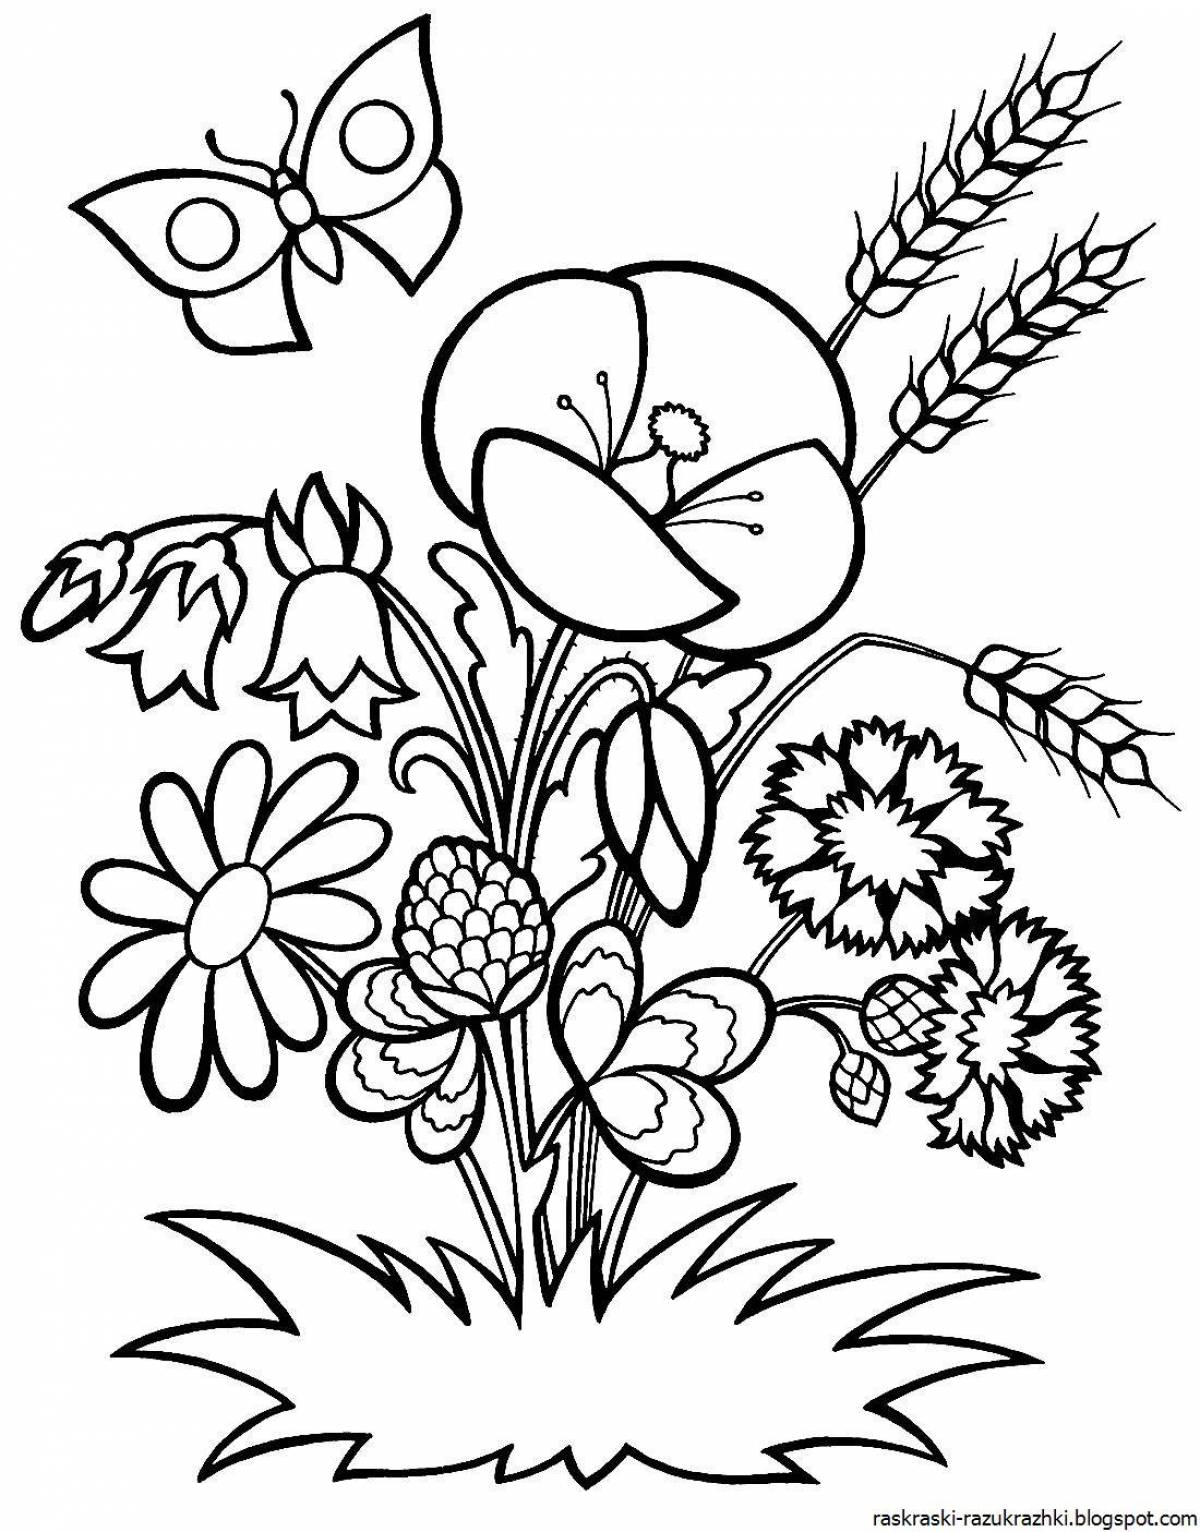 Elegant flowers coloring book for children 6-7 years old